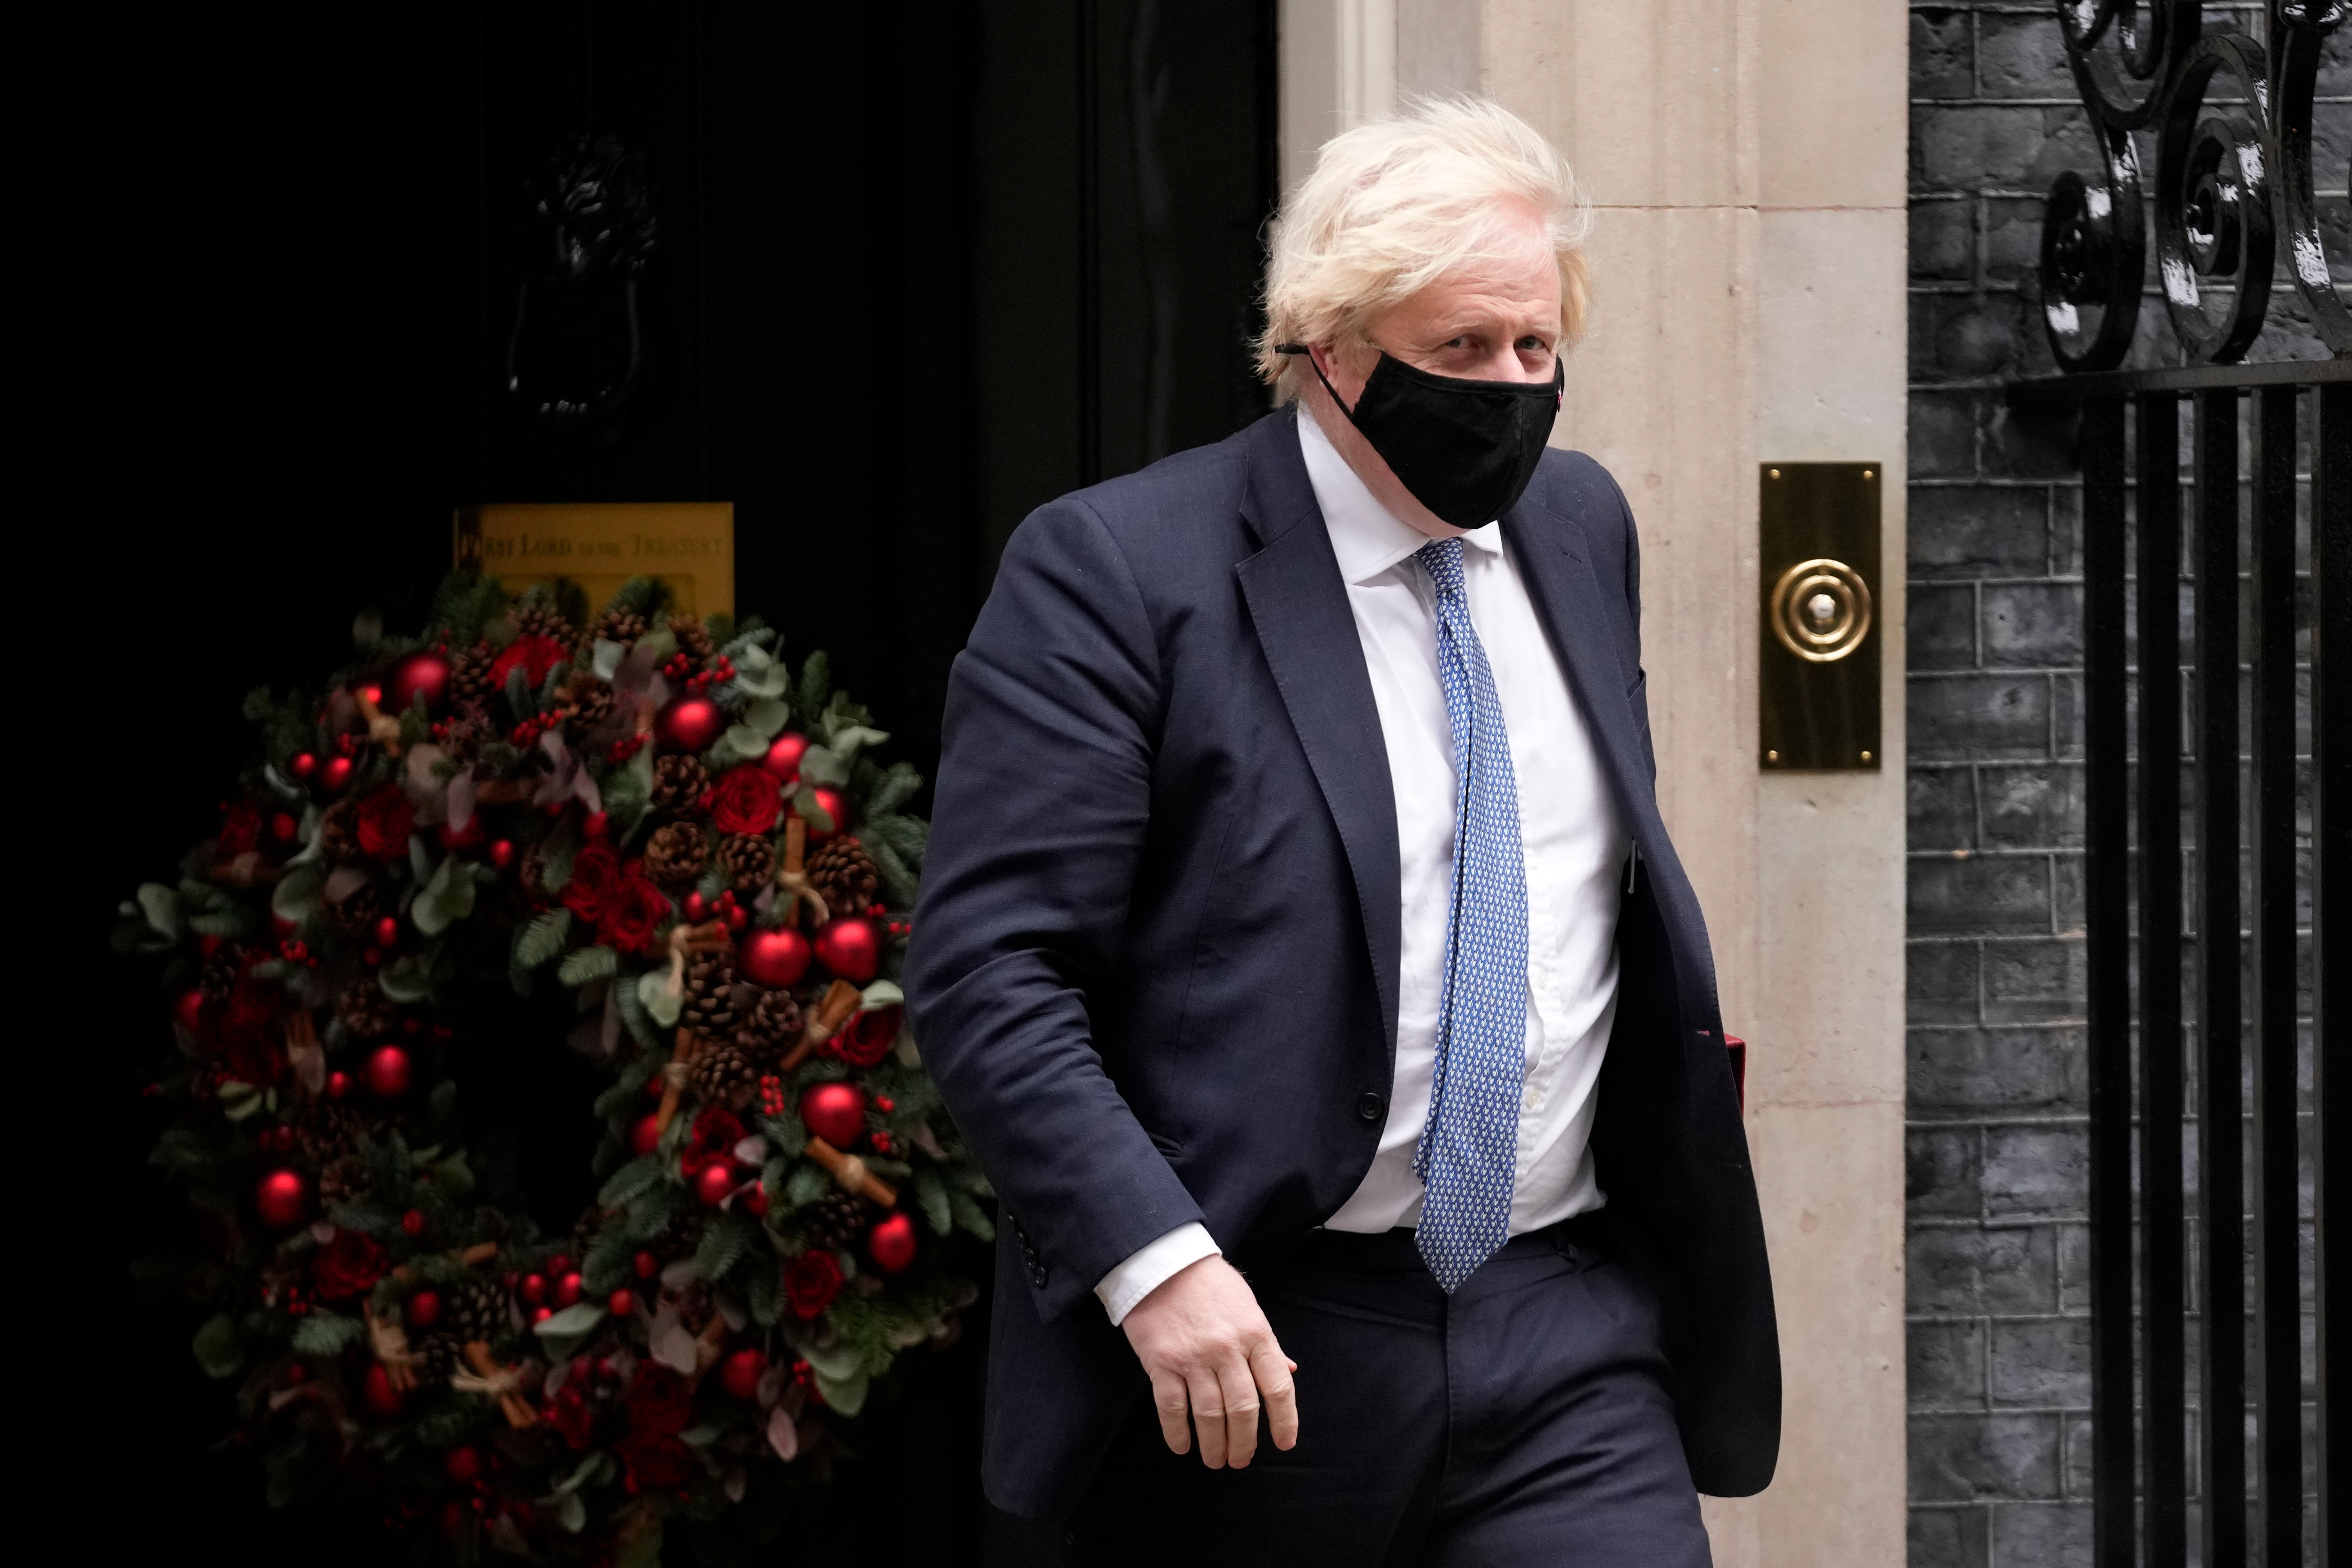 Boris Johnson leaves 10 Downing Street to attend Prime Minister’s Questions